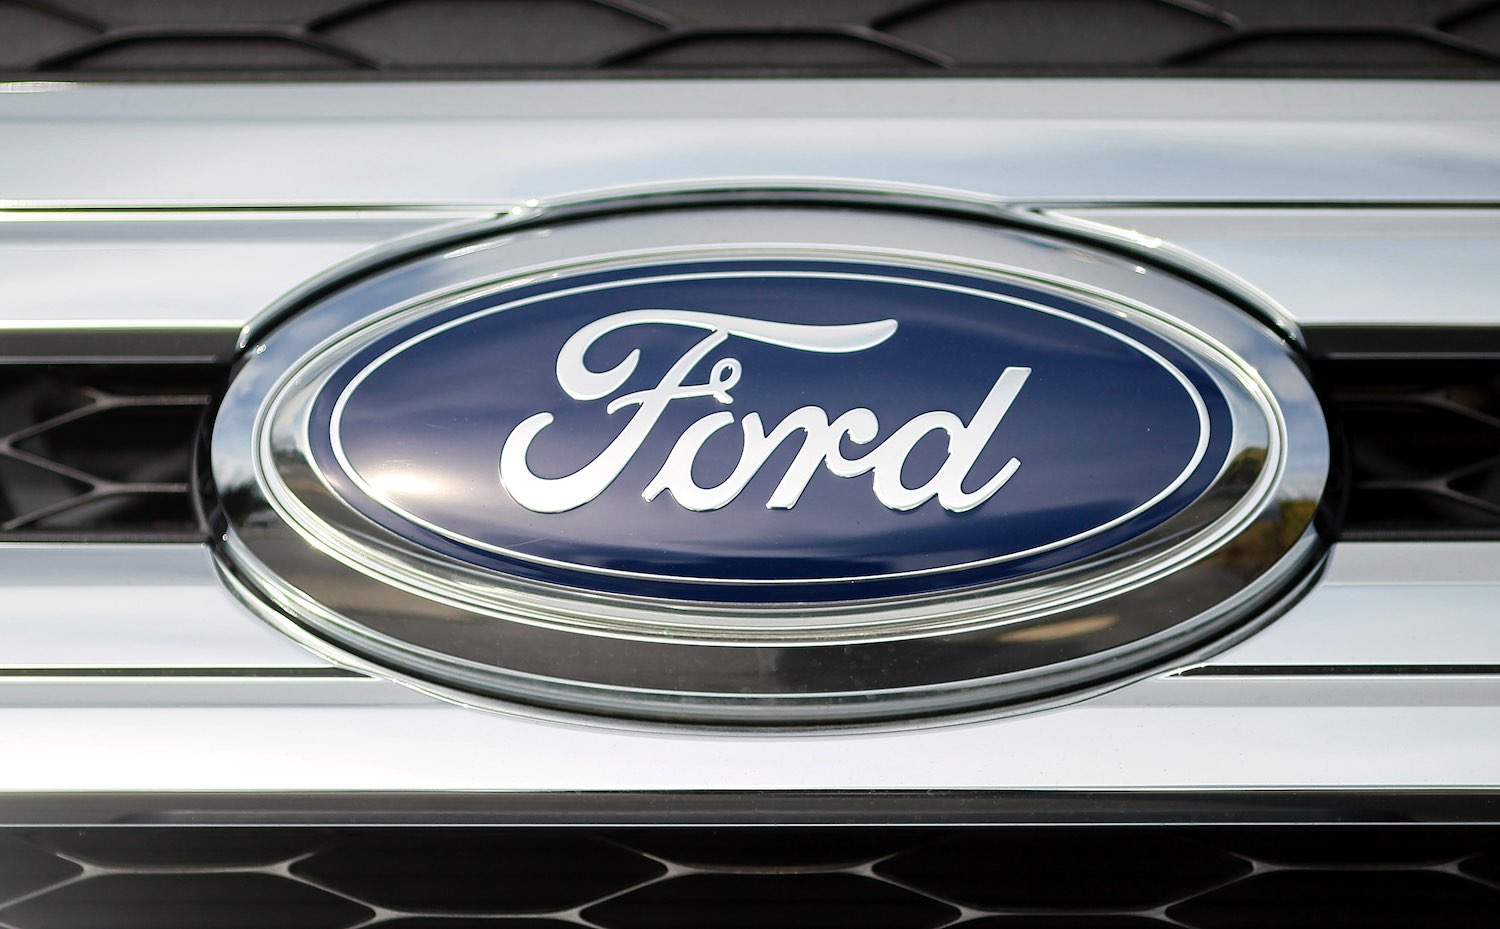 Grille of the Ford logo in an F-150